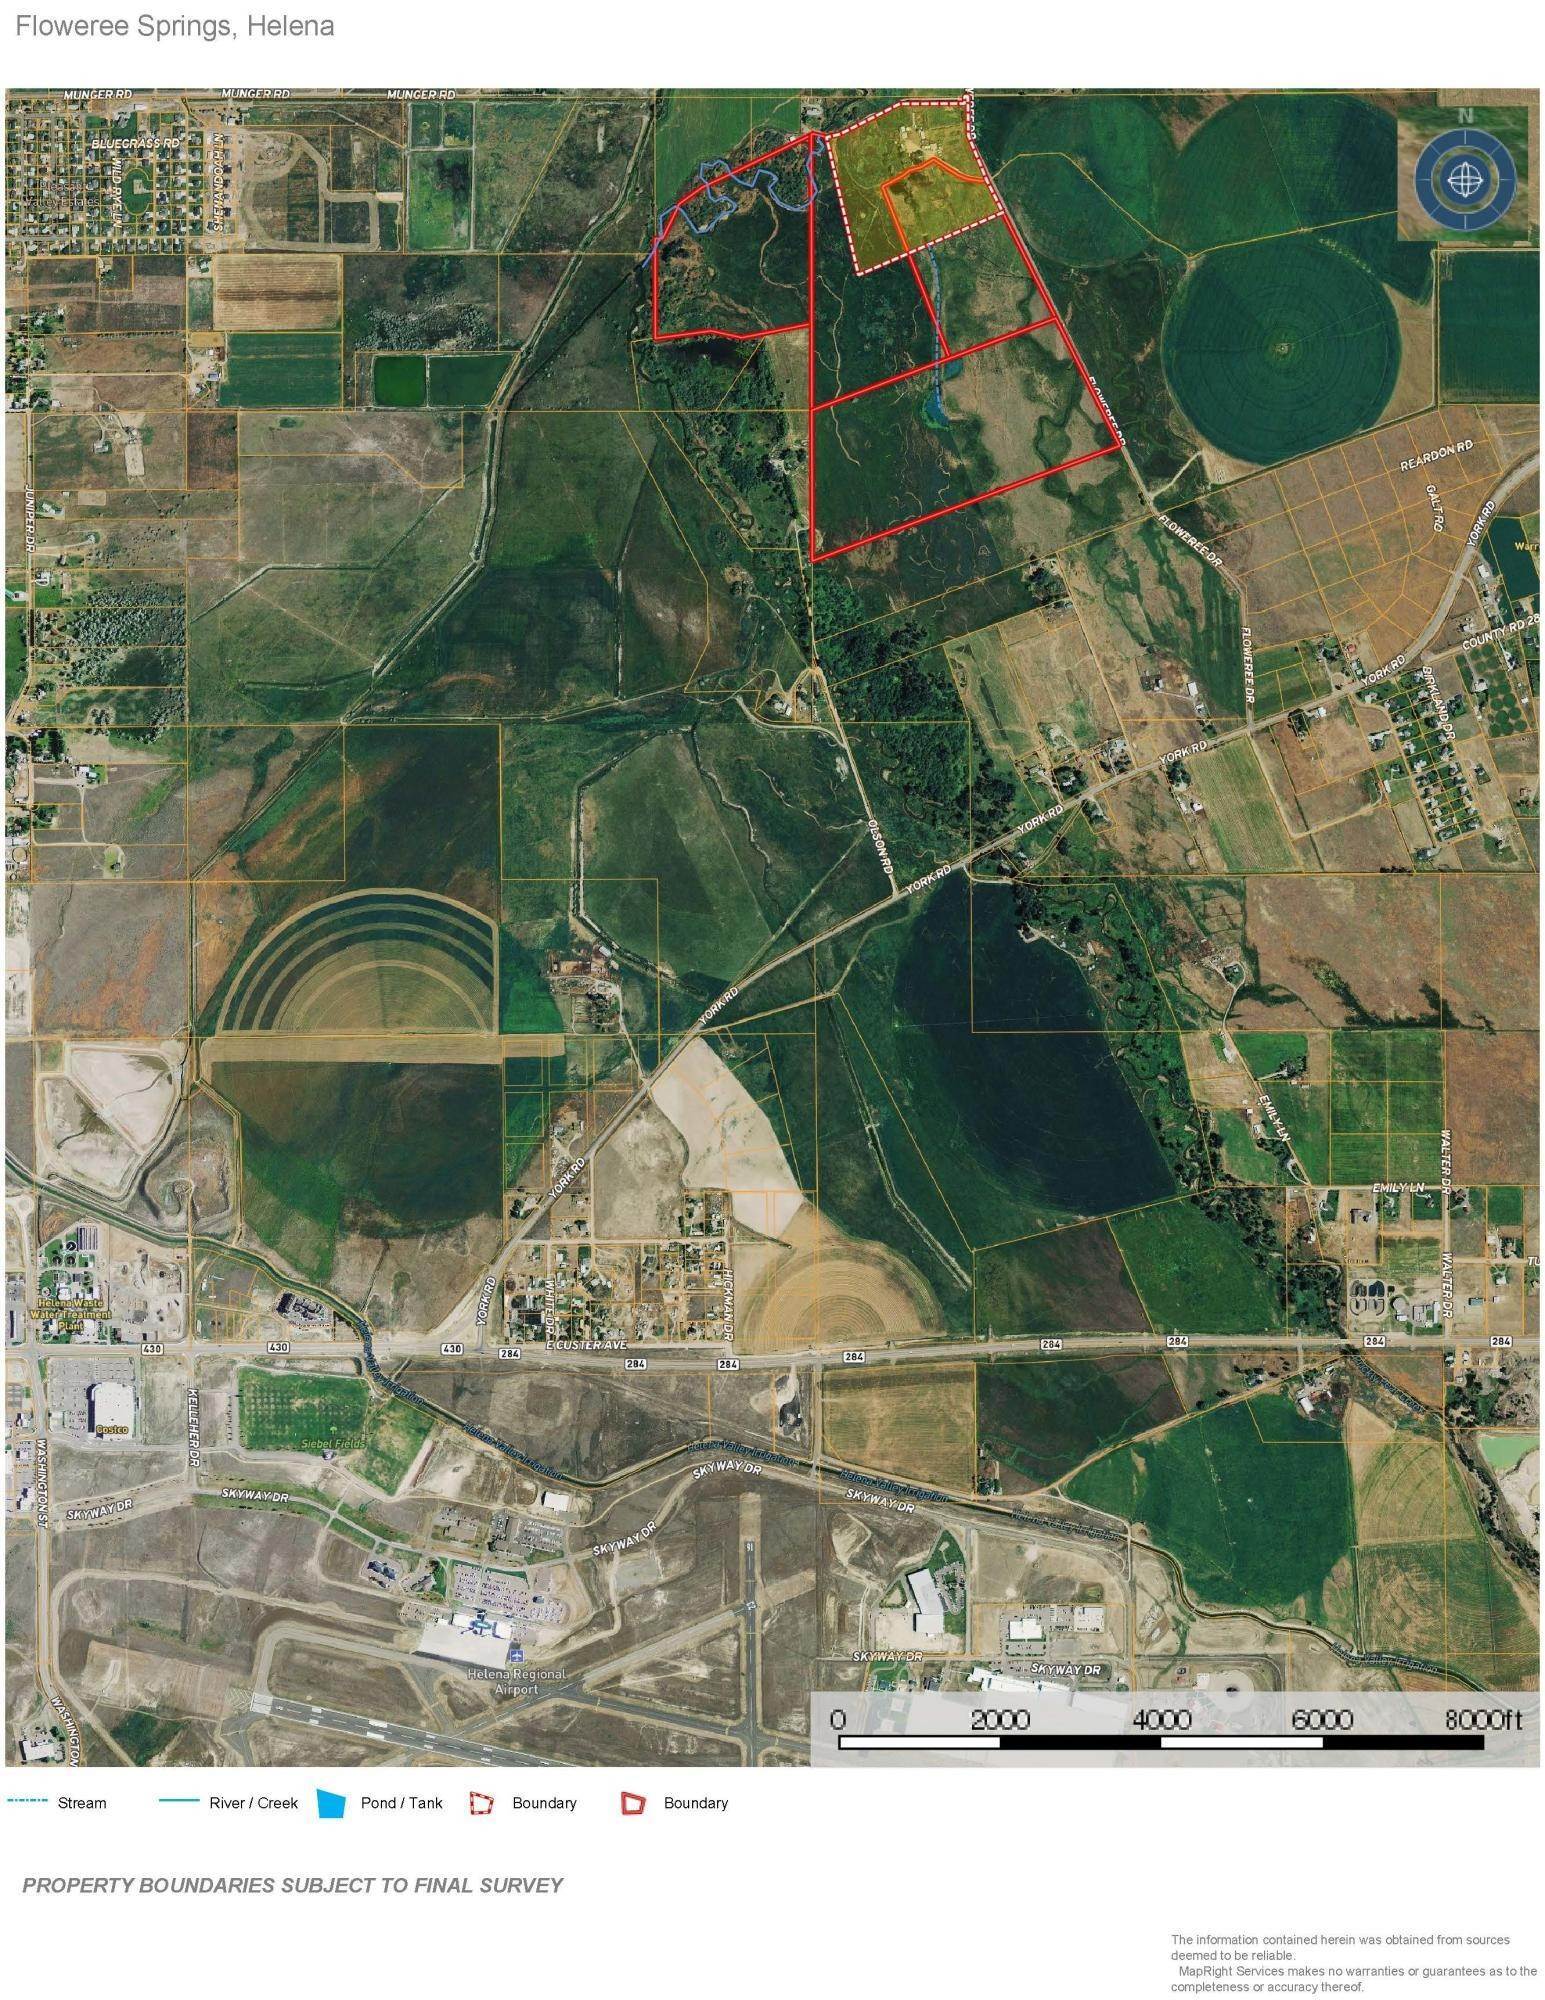 11. Land for Sale at Floweree Springs Helena, Montana 59602 United States